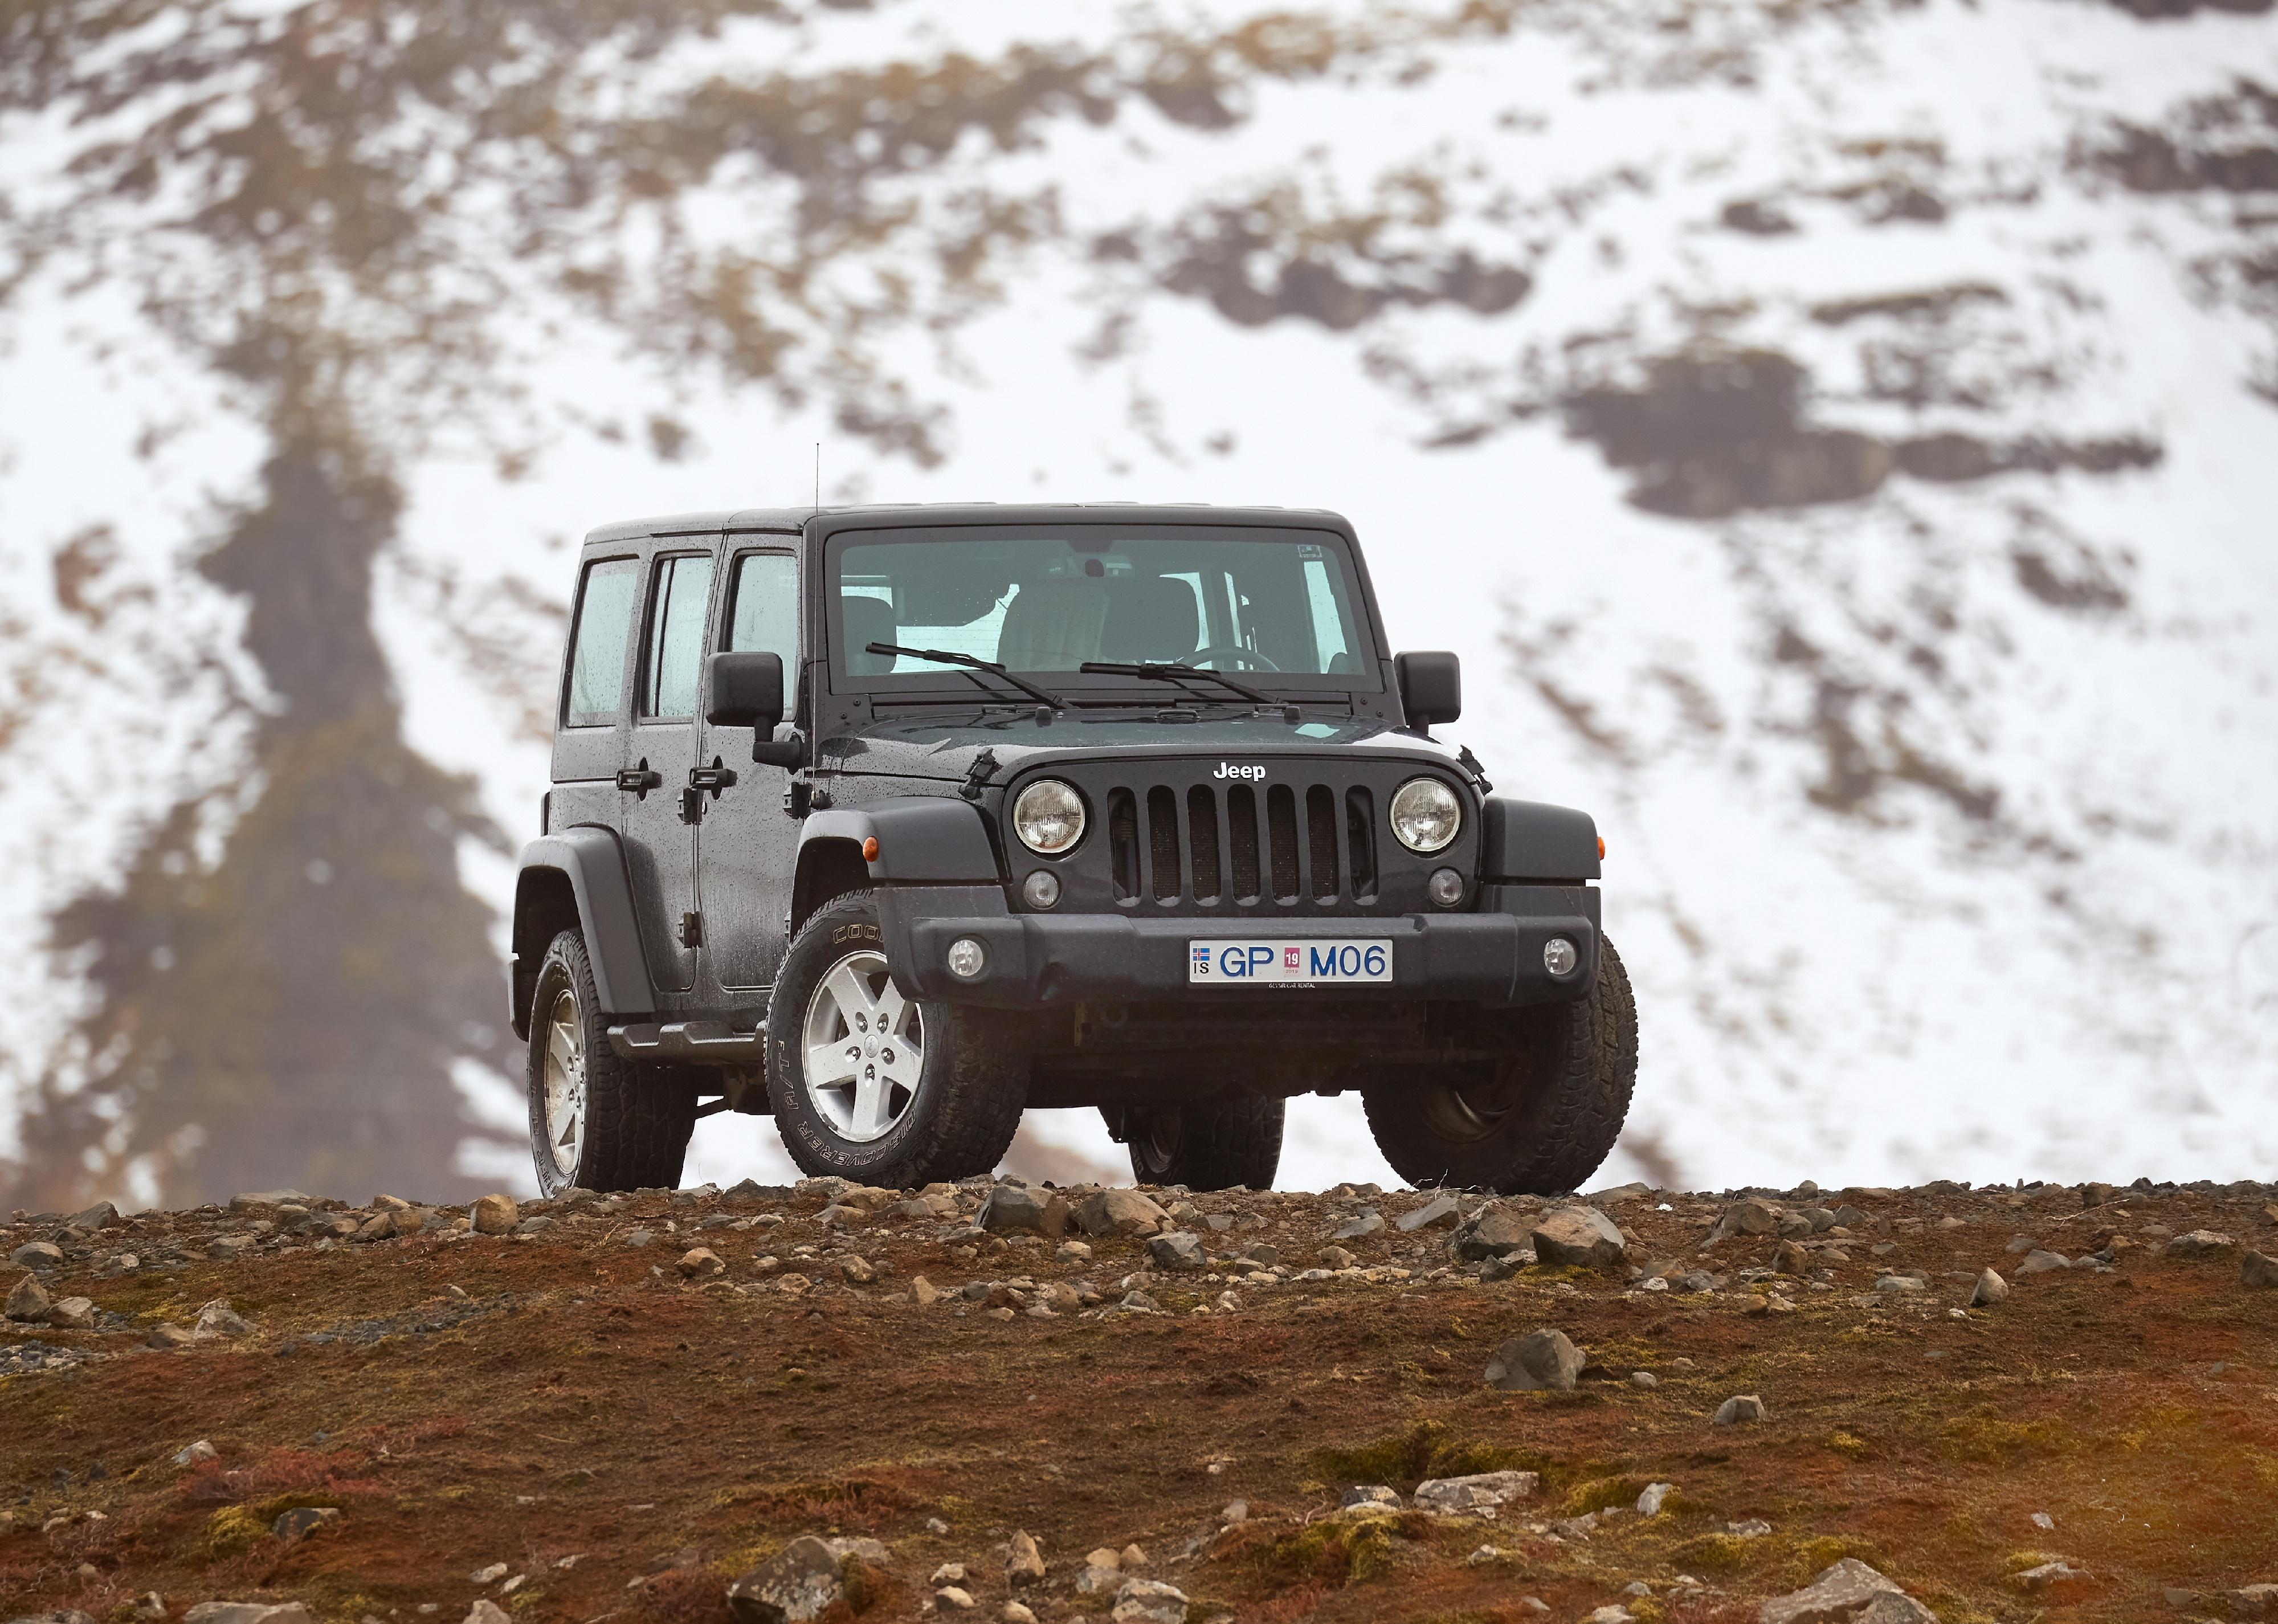 Jeep Wrangler Unlimited four wheel drive vehicle on a mountain landscape.